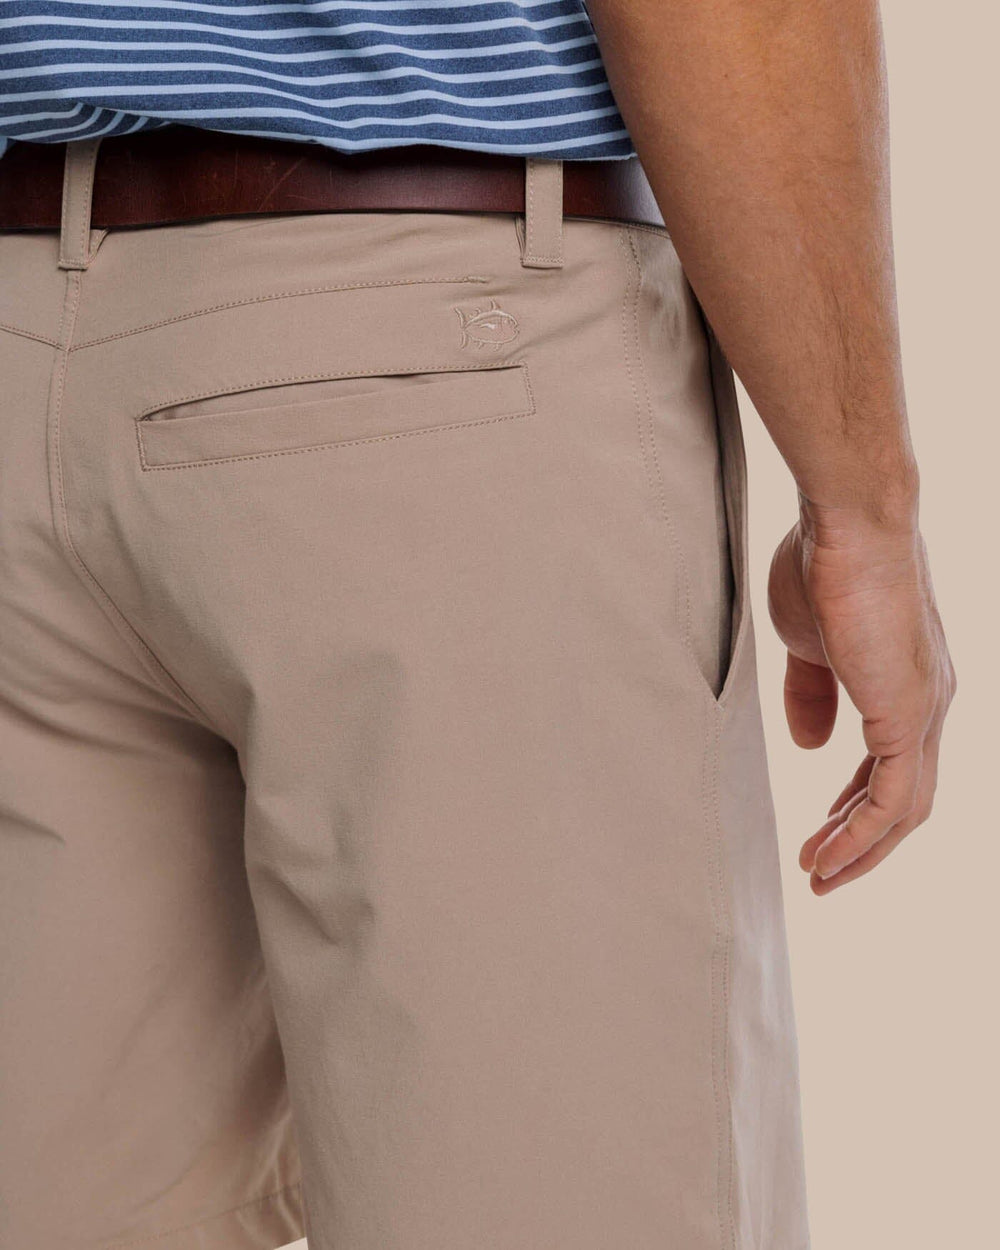 The detail view of the Southern Tide T3 Gulf 9 Inch Performance Short by Southern Tide - Sandstone Khaki